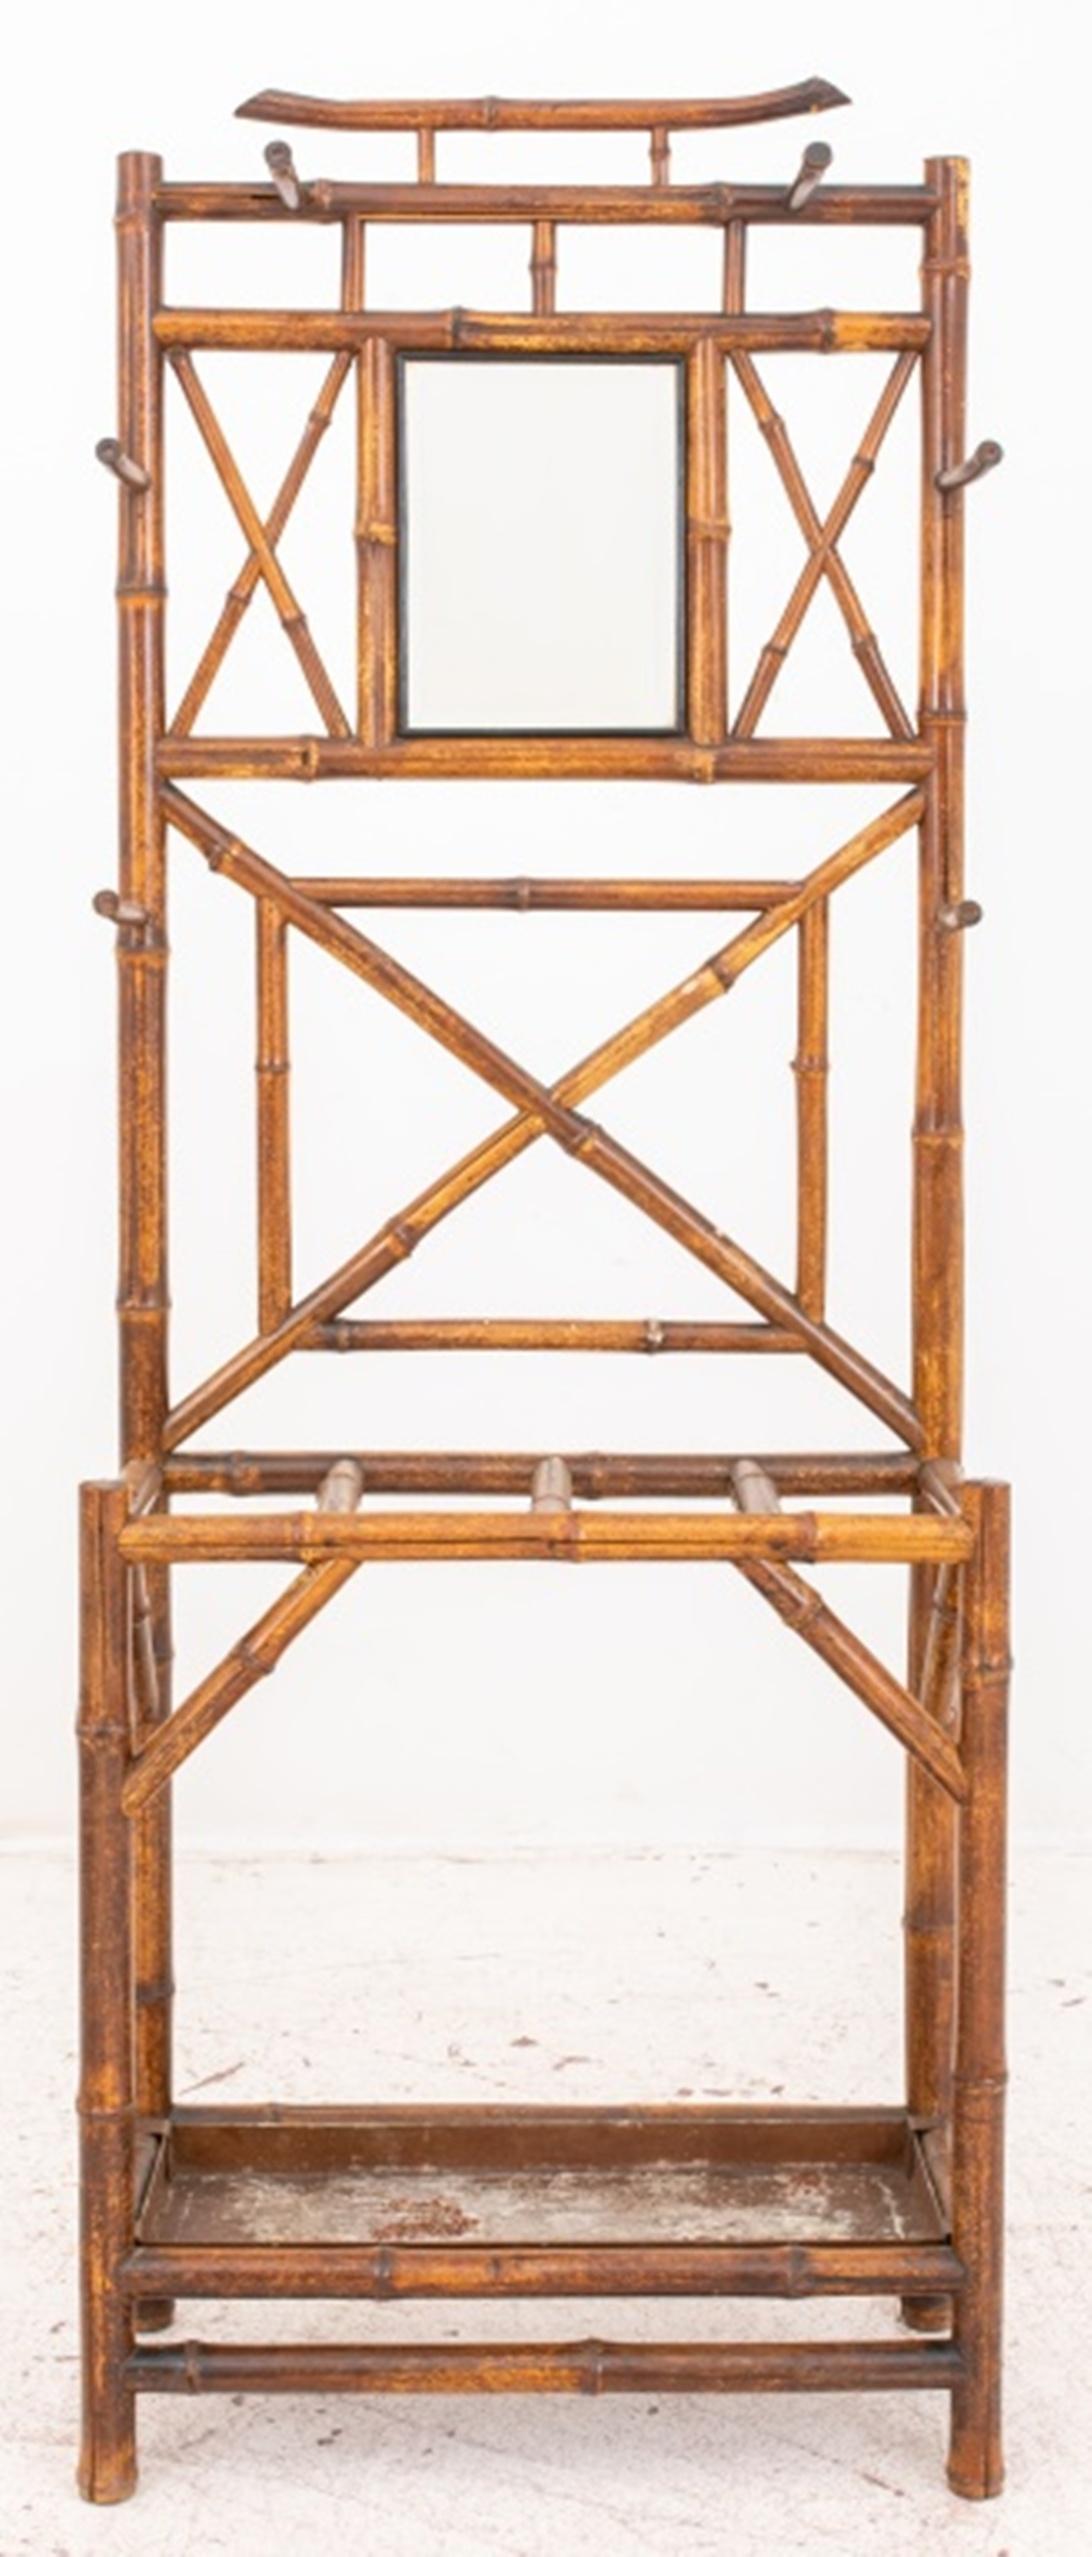 Aesthetic Movement hall tree, having a patterned bamboo frame, beveled mirror, four coat hooks and four compartment walking stick / cane / umbrella rack with pan, circa 1900s. 
Dimensions: 72.5